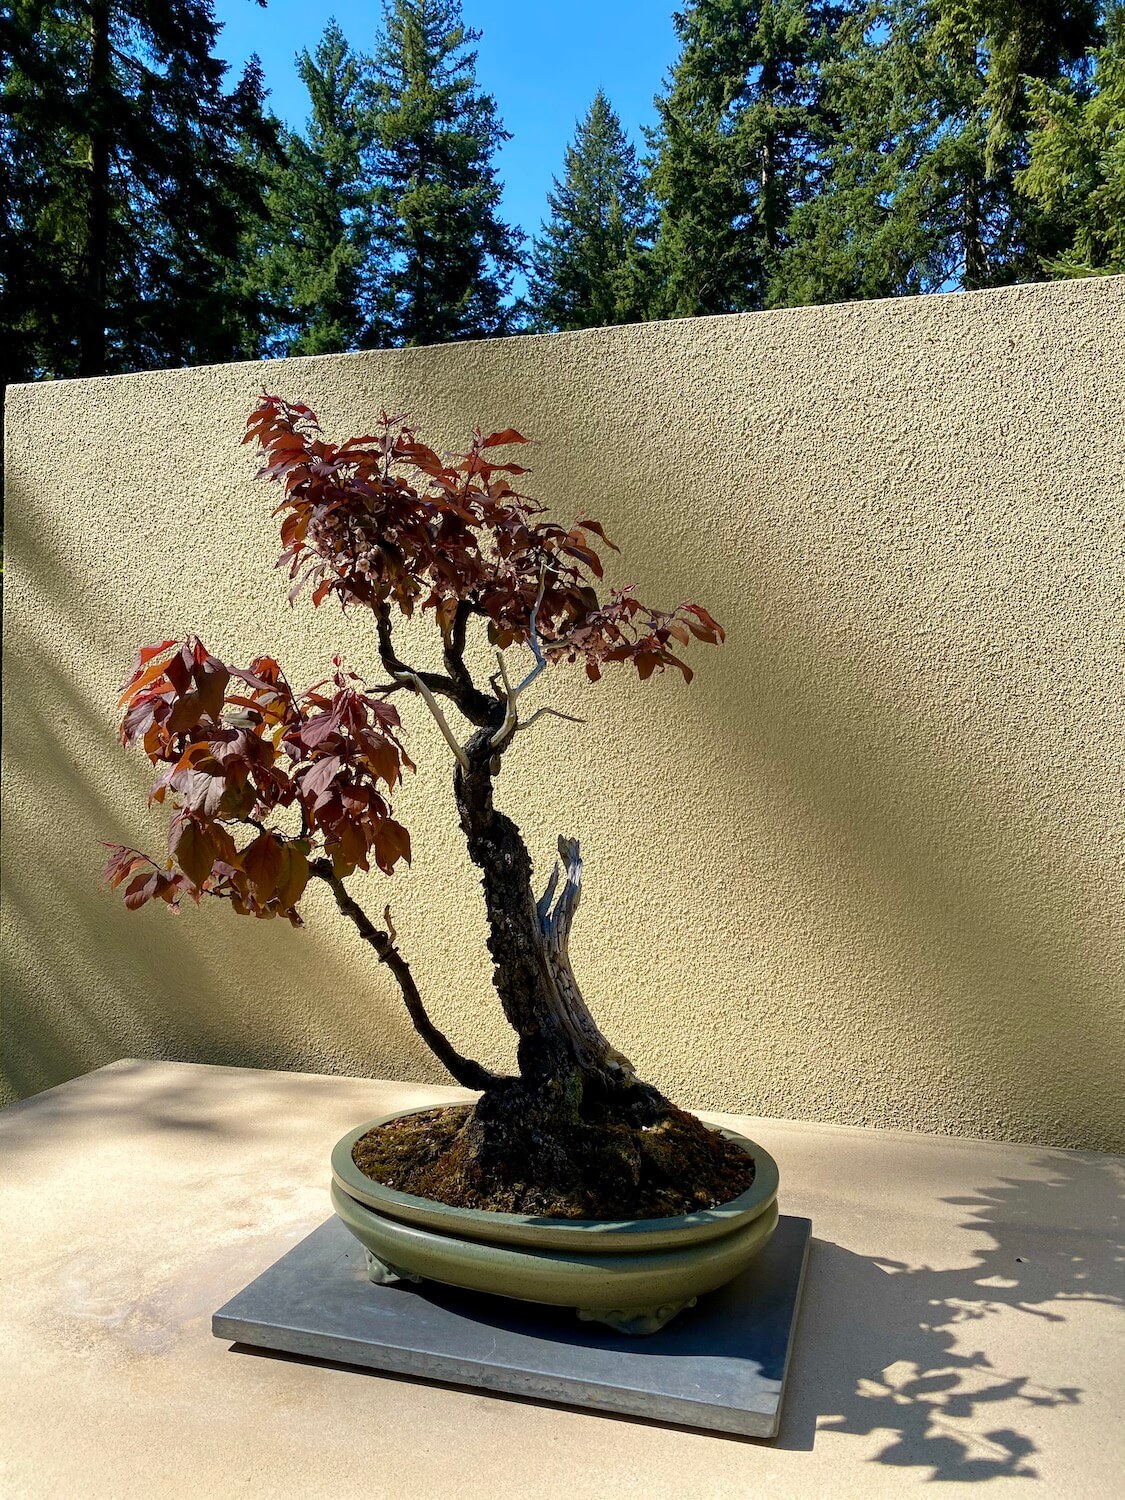 The Pacific Bonsai Museum hosts over 60 miniature trees amongst a nature setting, including this intricately tripped Japanese plum tree, with fresh young vibrant purple leaves.